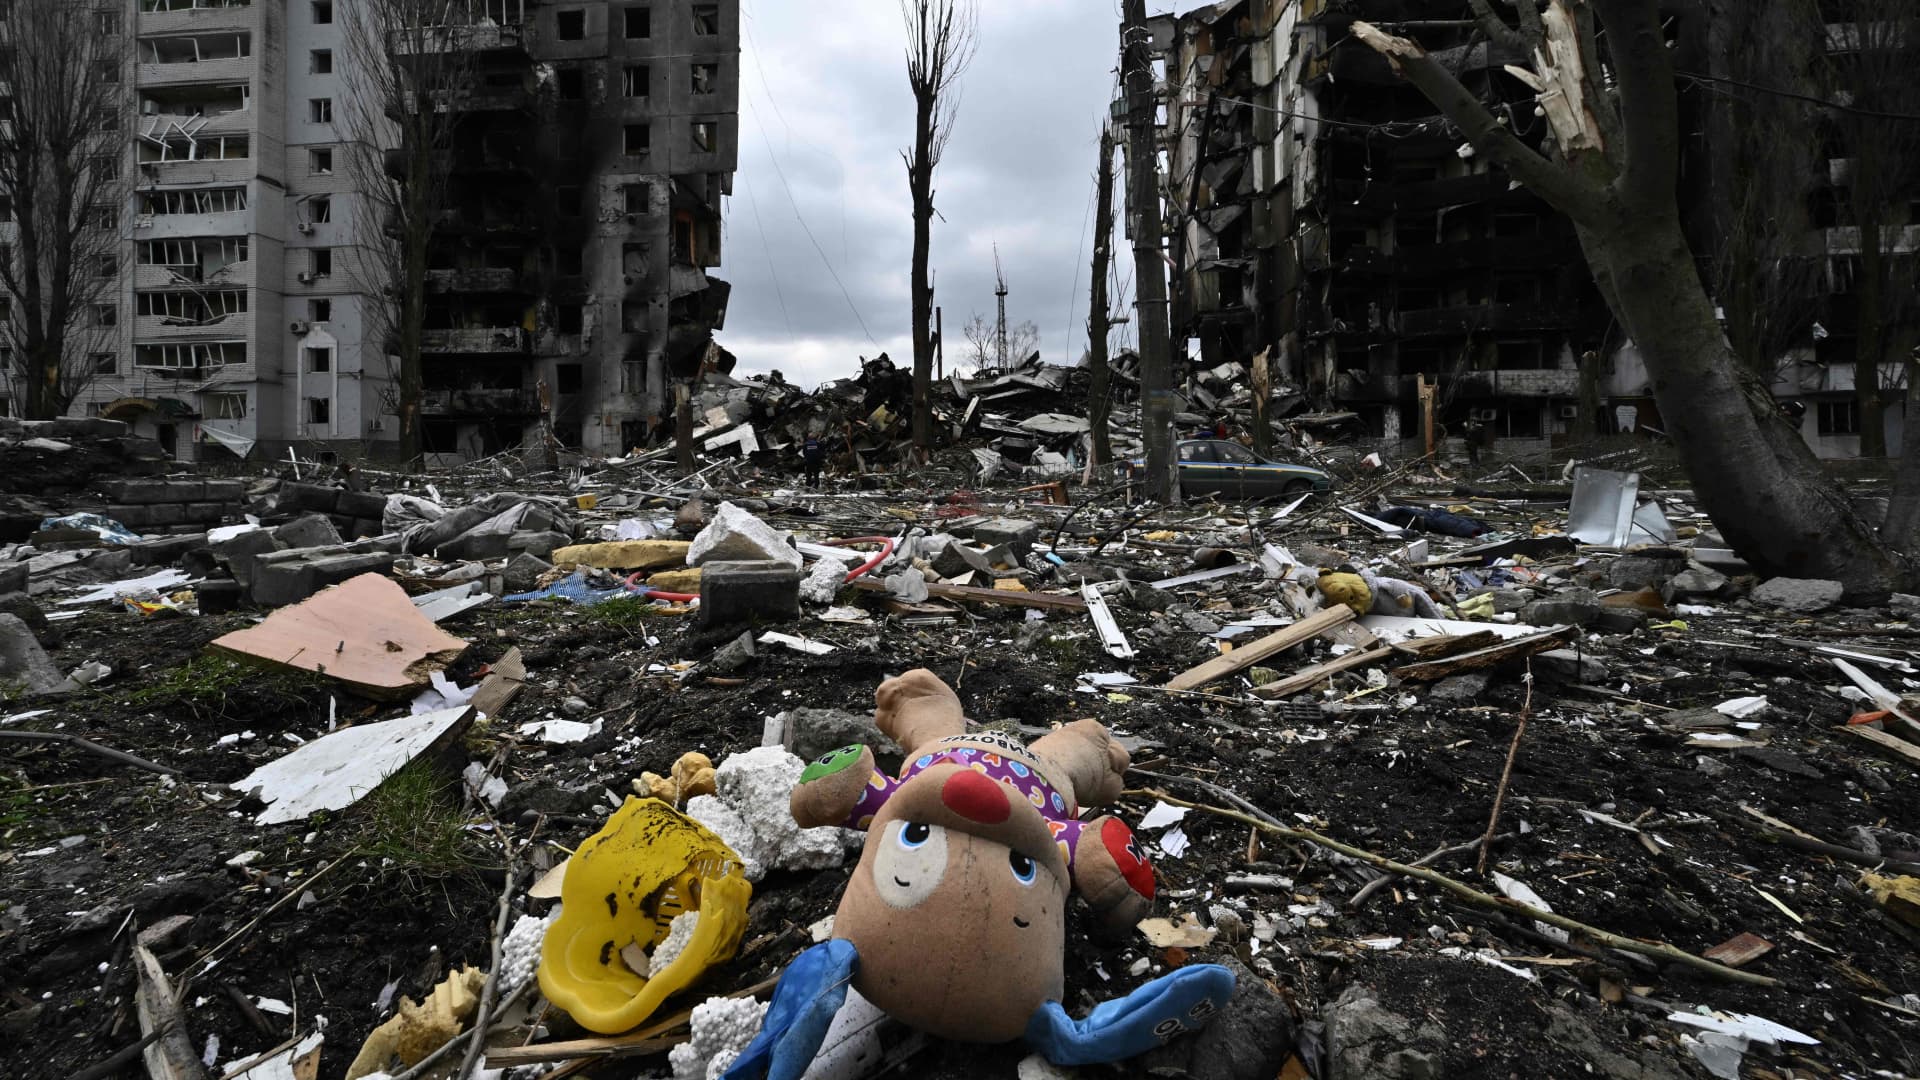 This photograph taken on April 6, 2022, shows a toy and personal belongings among rubble in front of a destroyed residential building in the town of Borodyanka, northwest of Kyiv.